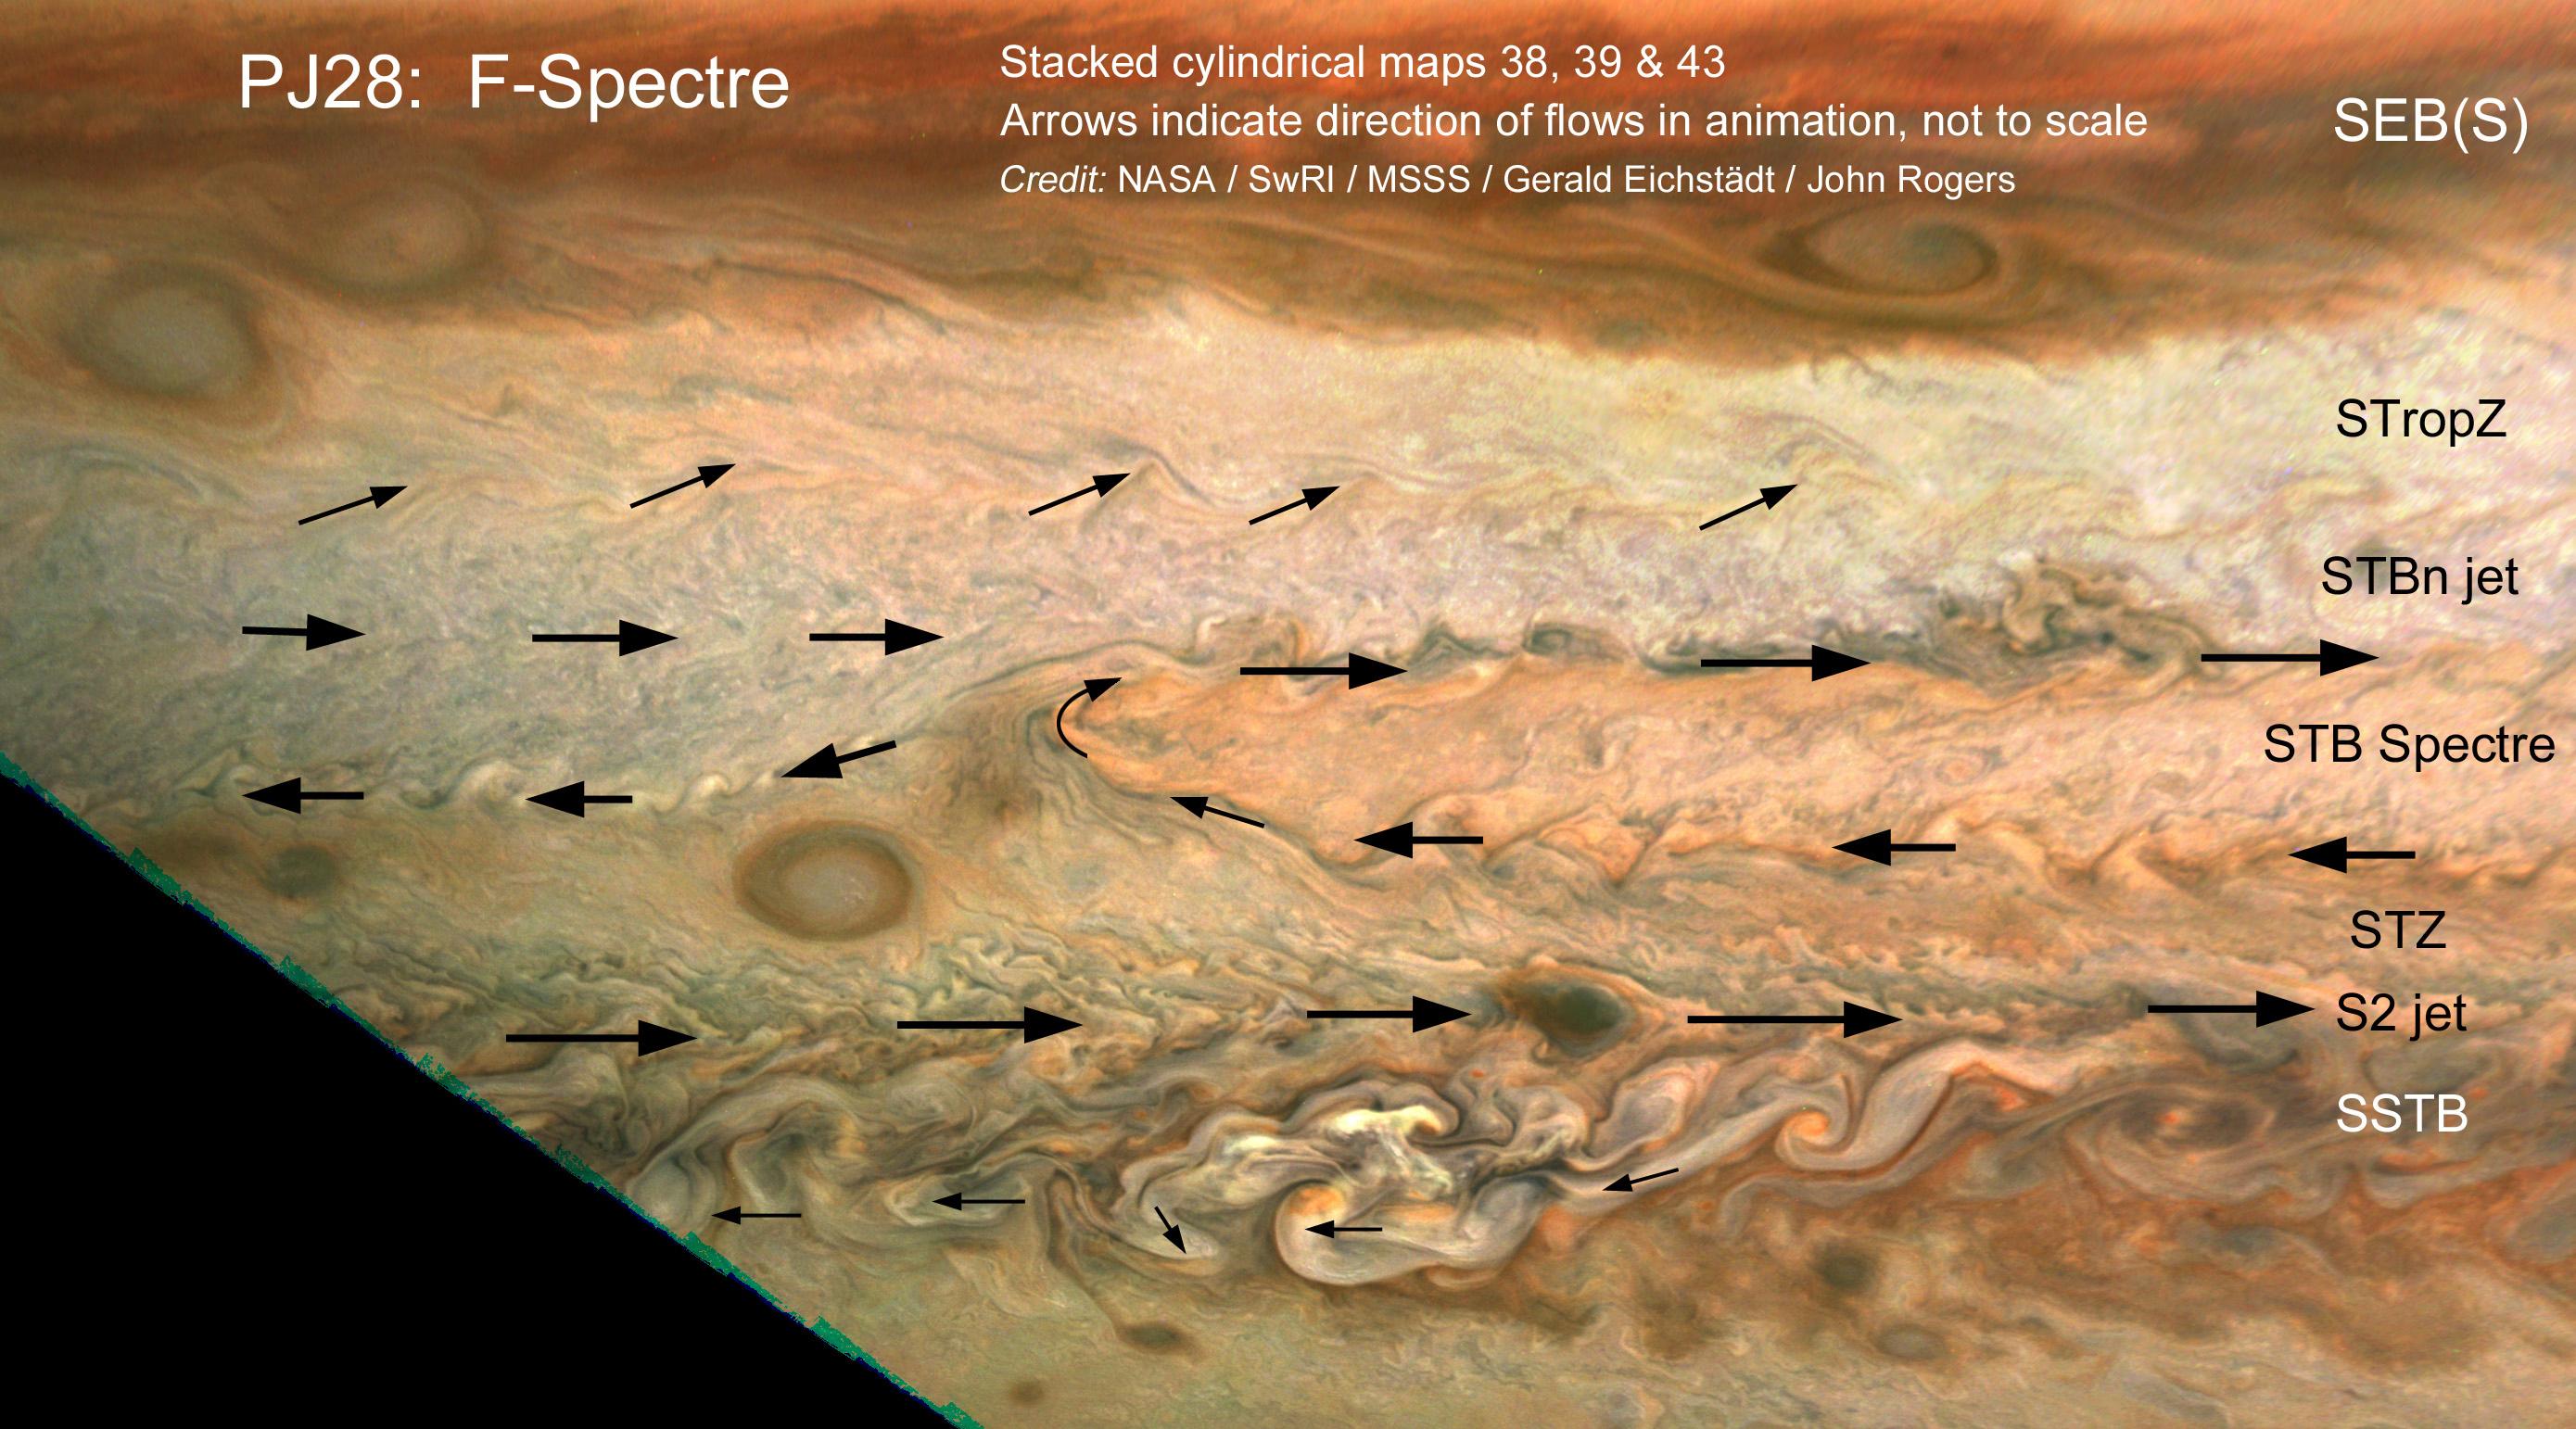 PIA24235: Tracking Clouds on Jupiter